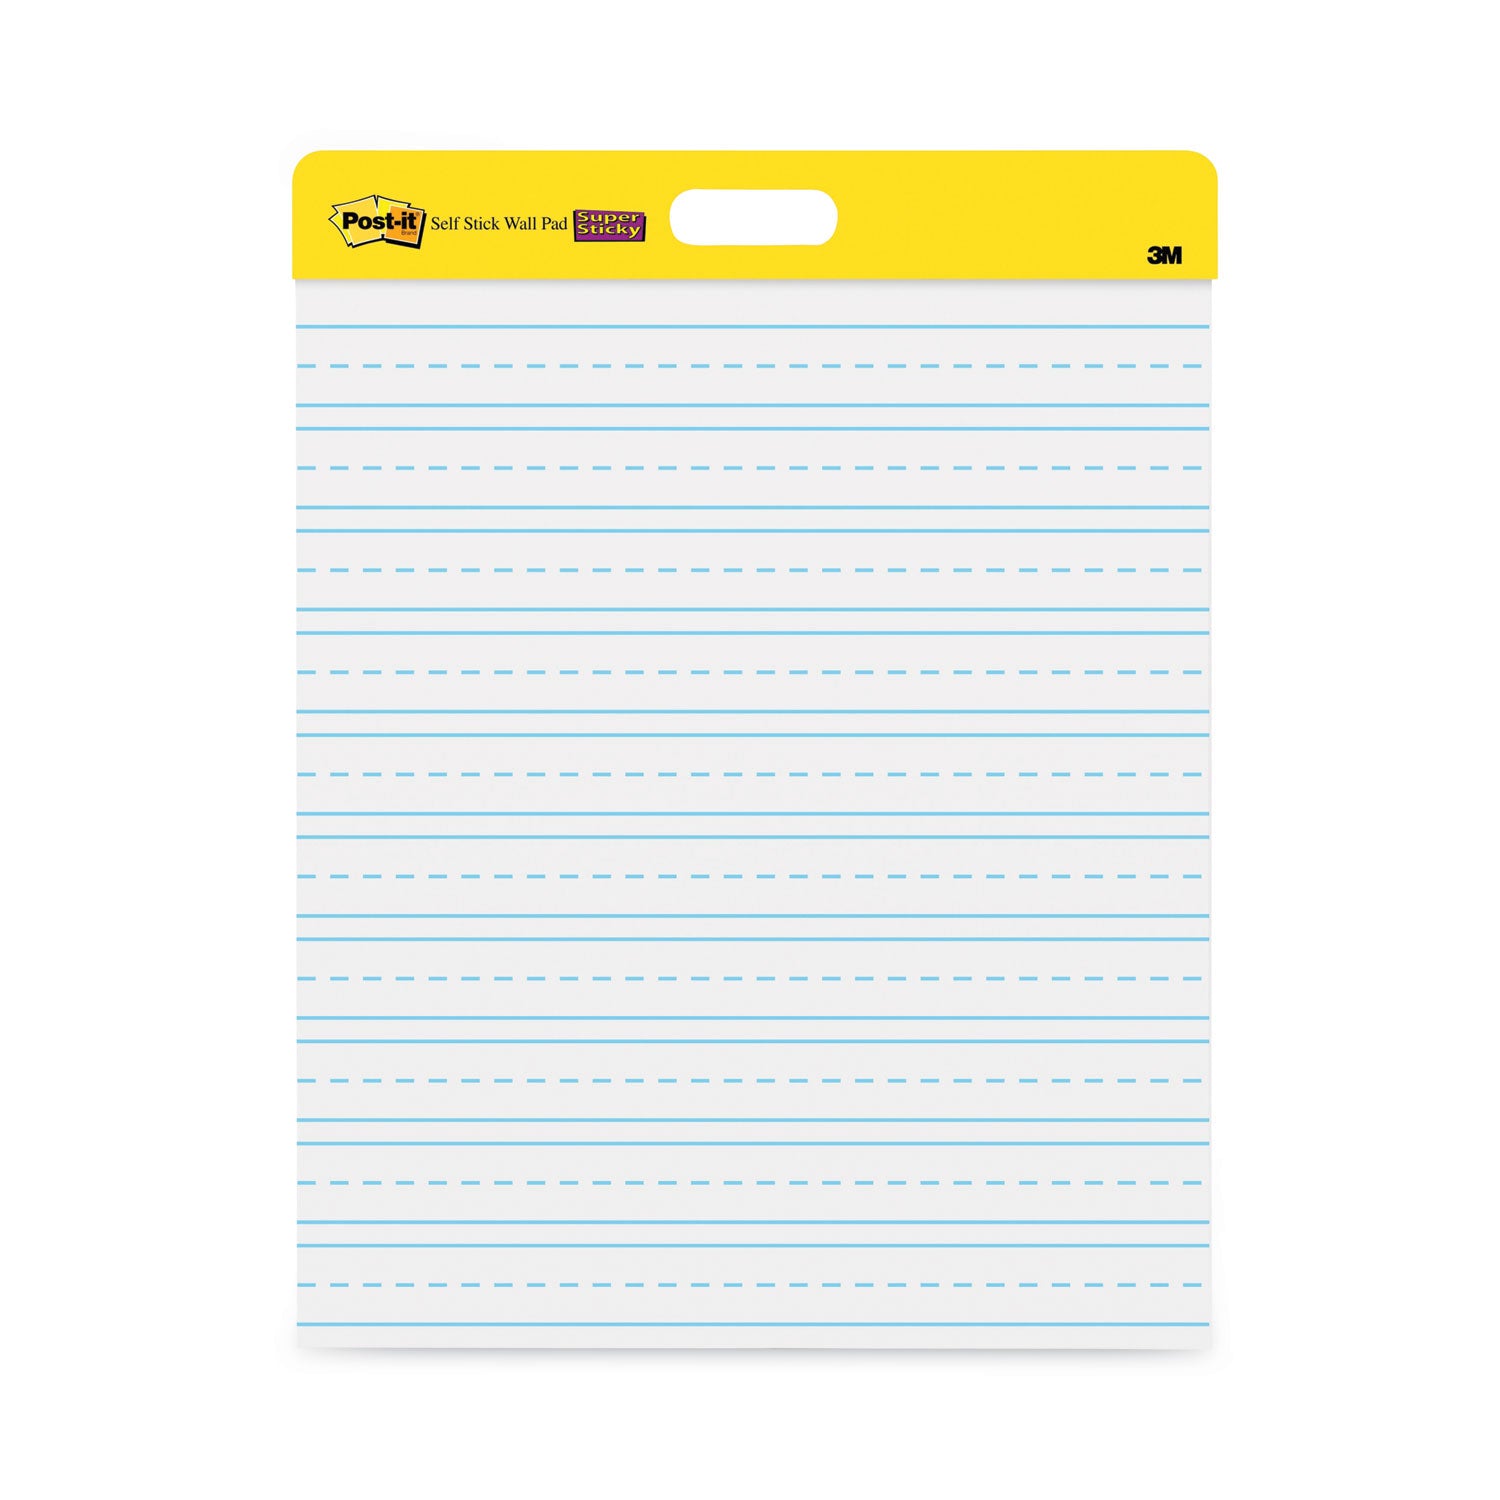 Self-Stick Wall Pad, Manuscript Format (Primary 3" Rule), 20 x 23, White, 20 Sheets, 2/Pack - 